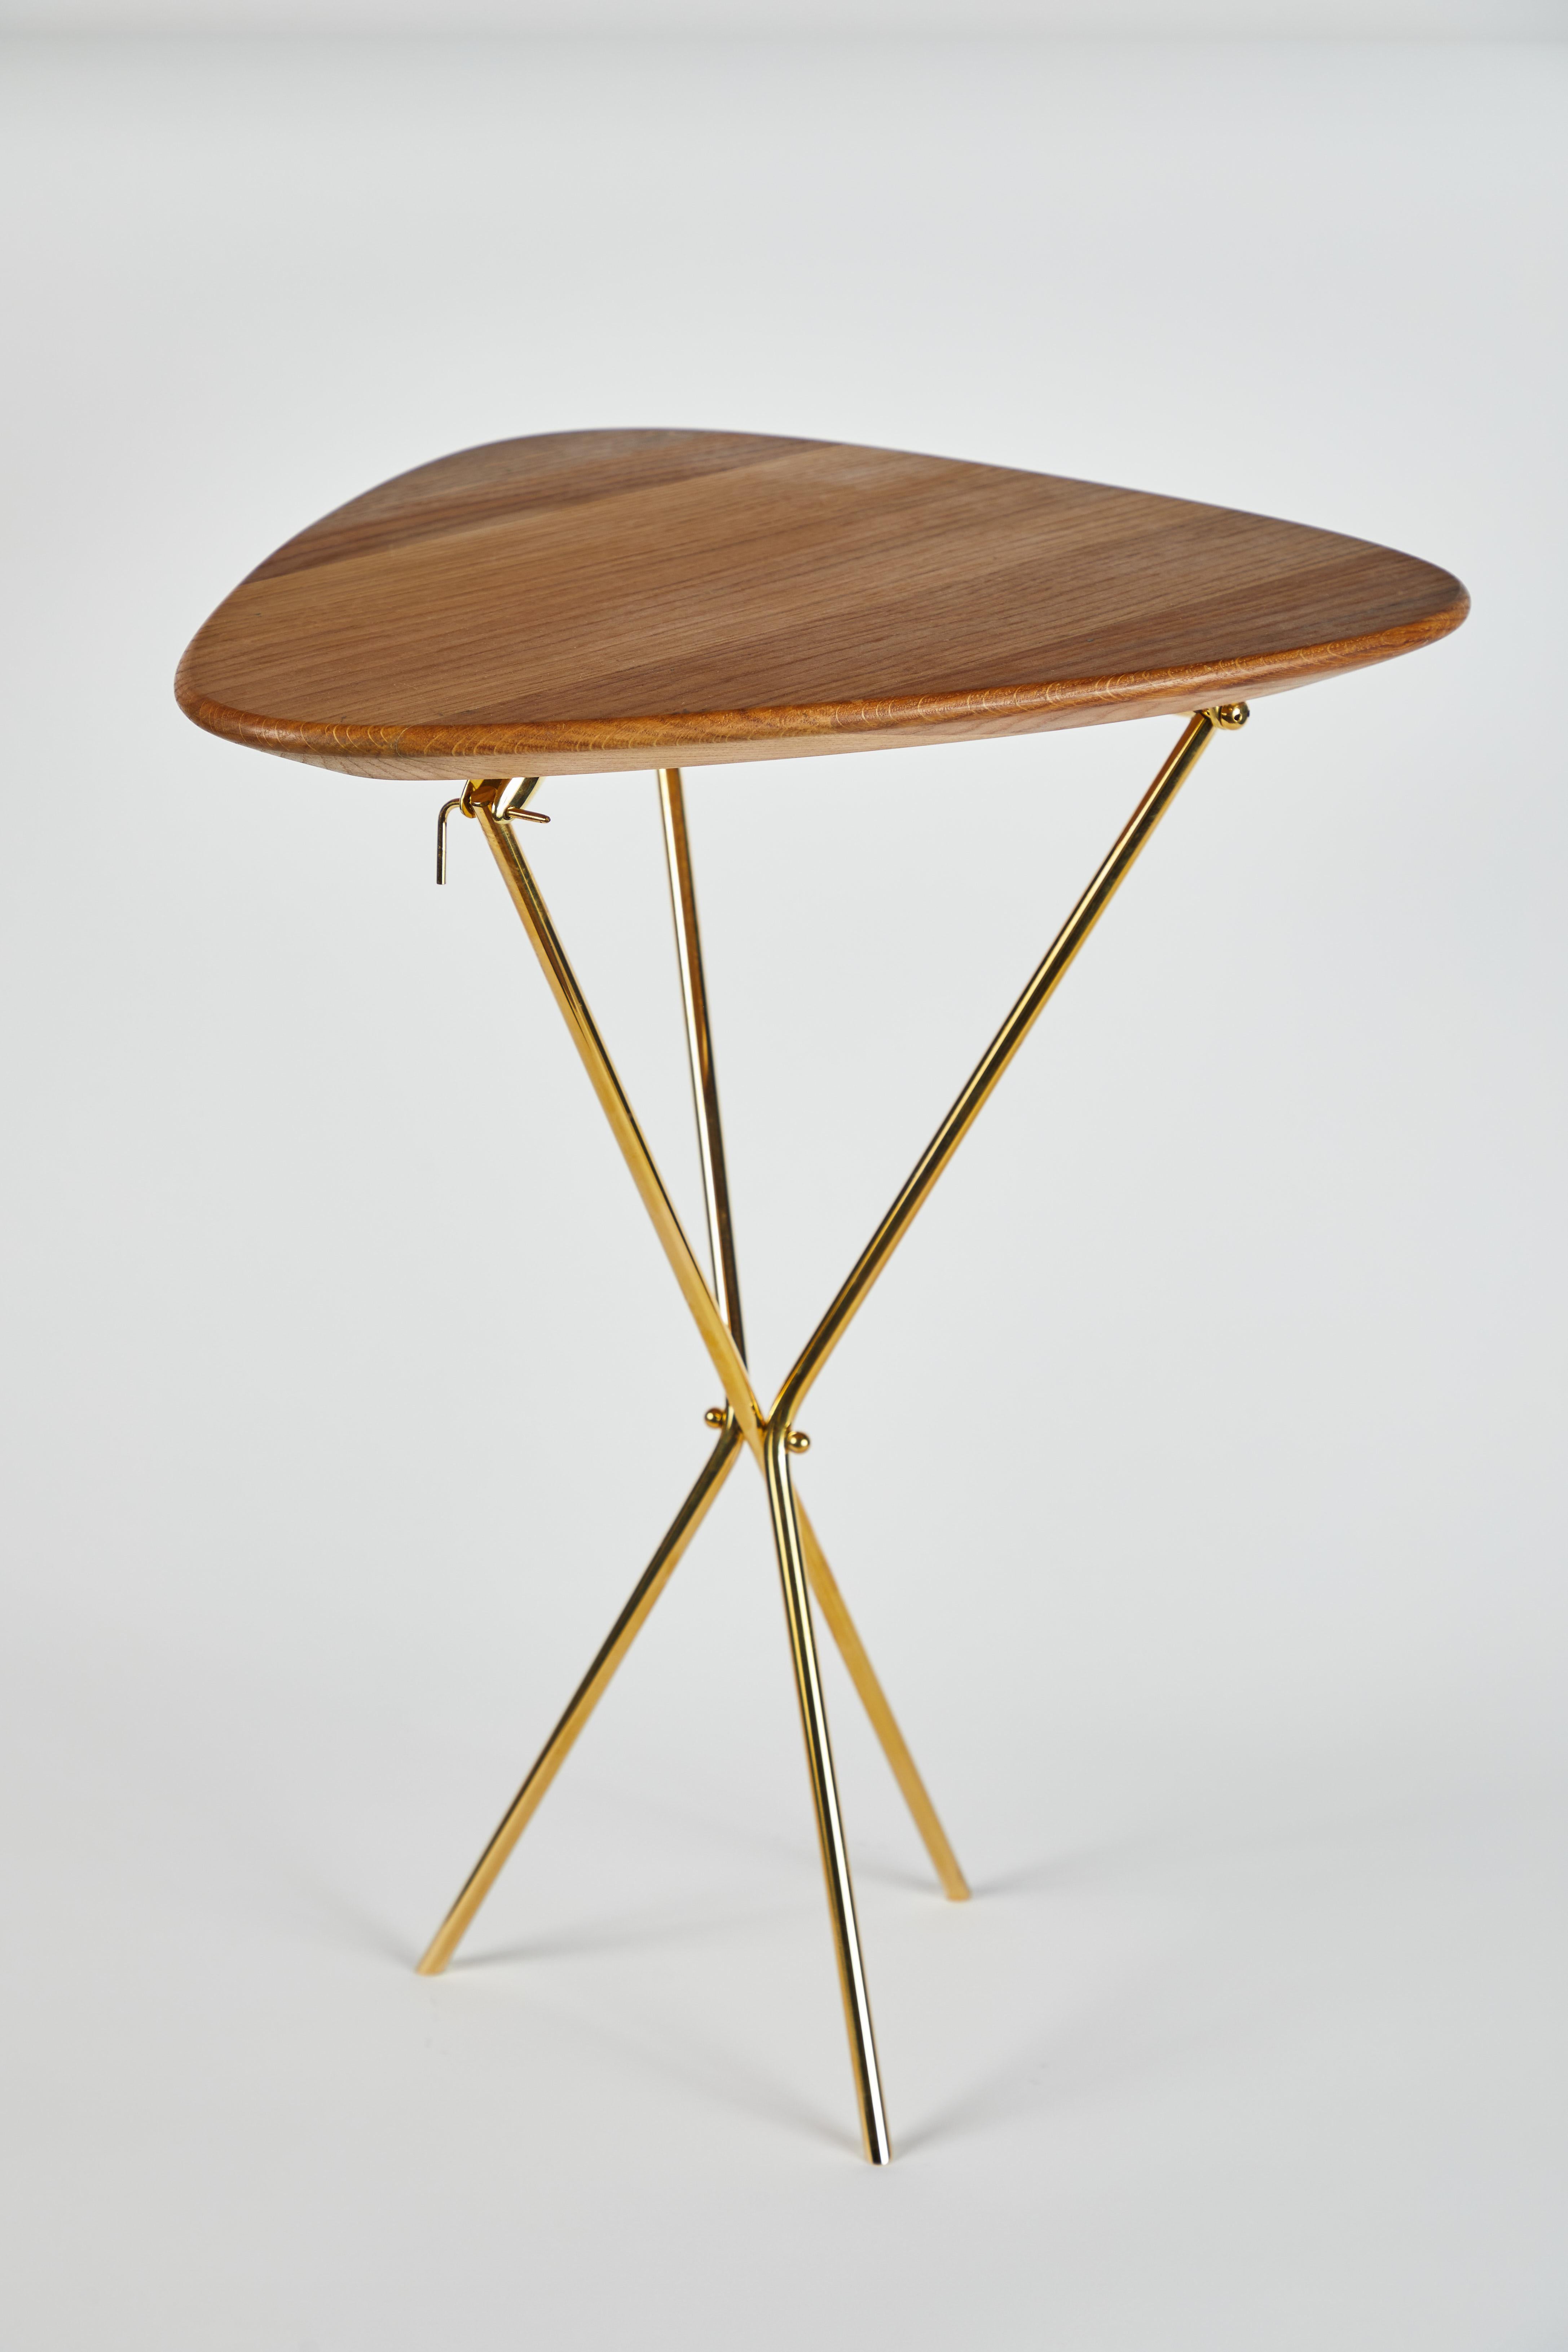 Polished Carl Auböck Model #3642 Brass and Oak Table For Sale